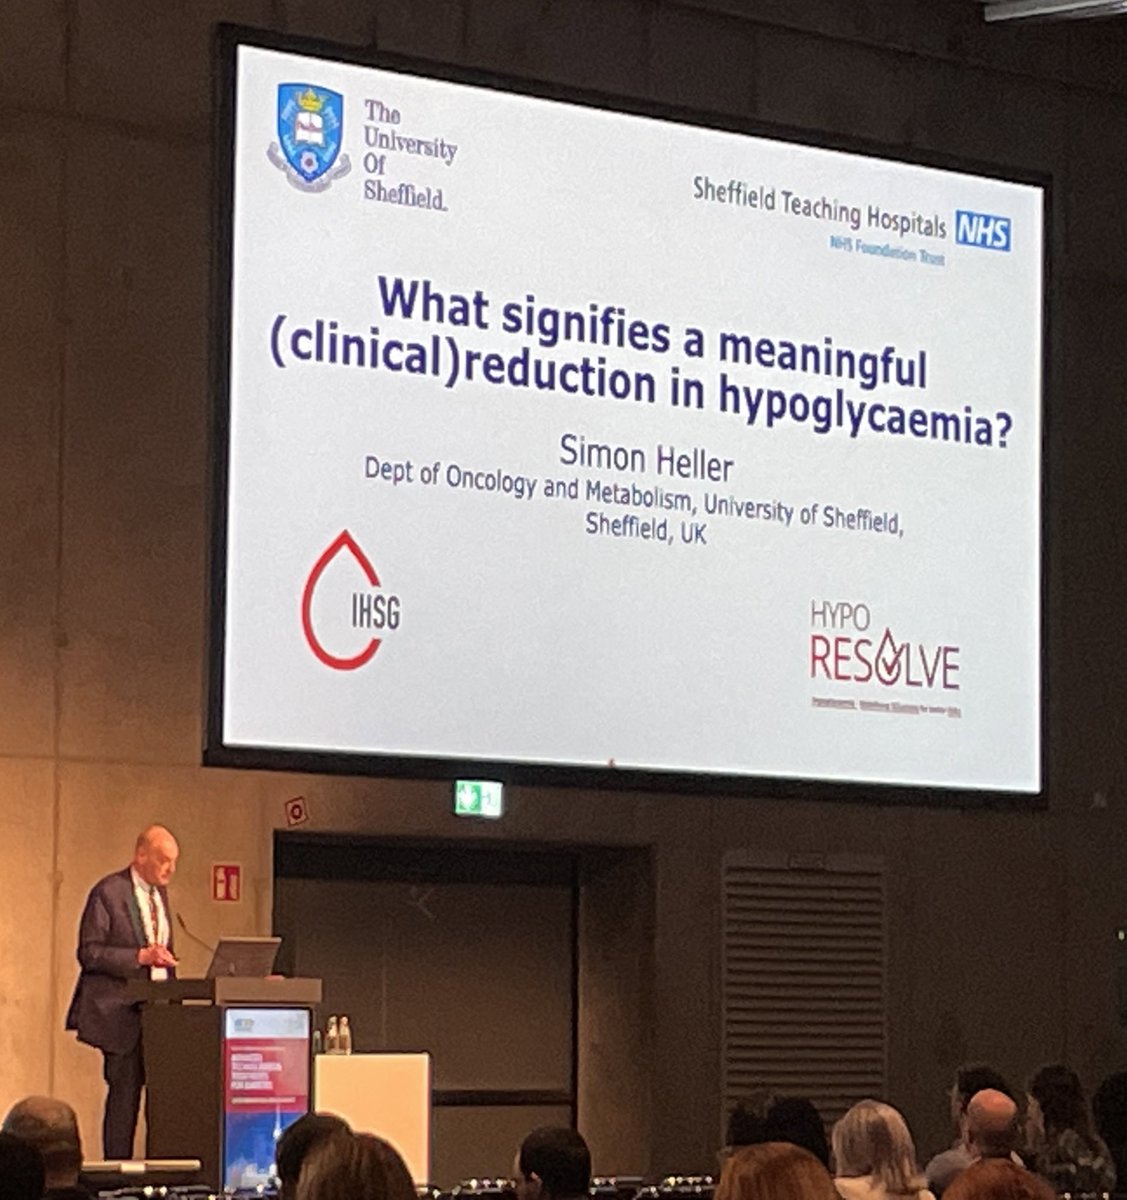 Great to hear some of the findings from the @HypoResolve study from Prof @simonrheller 📉

Simon is Chair of the Scientific Advisory Panel for the #Type1Diabetes #GrandChallenge, launched by @JDRFUK & @DUK_research thanks to a generous £50m donation from @stevemorganfdn 🌟